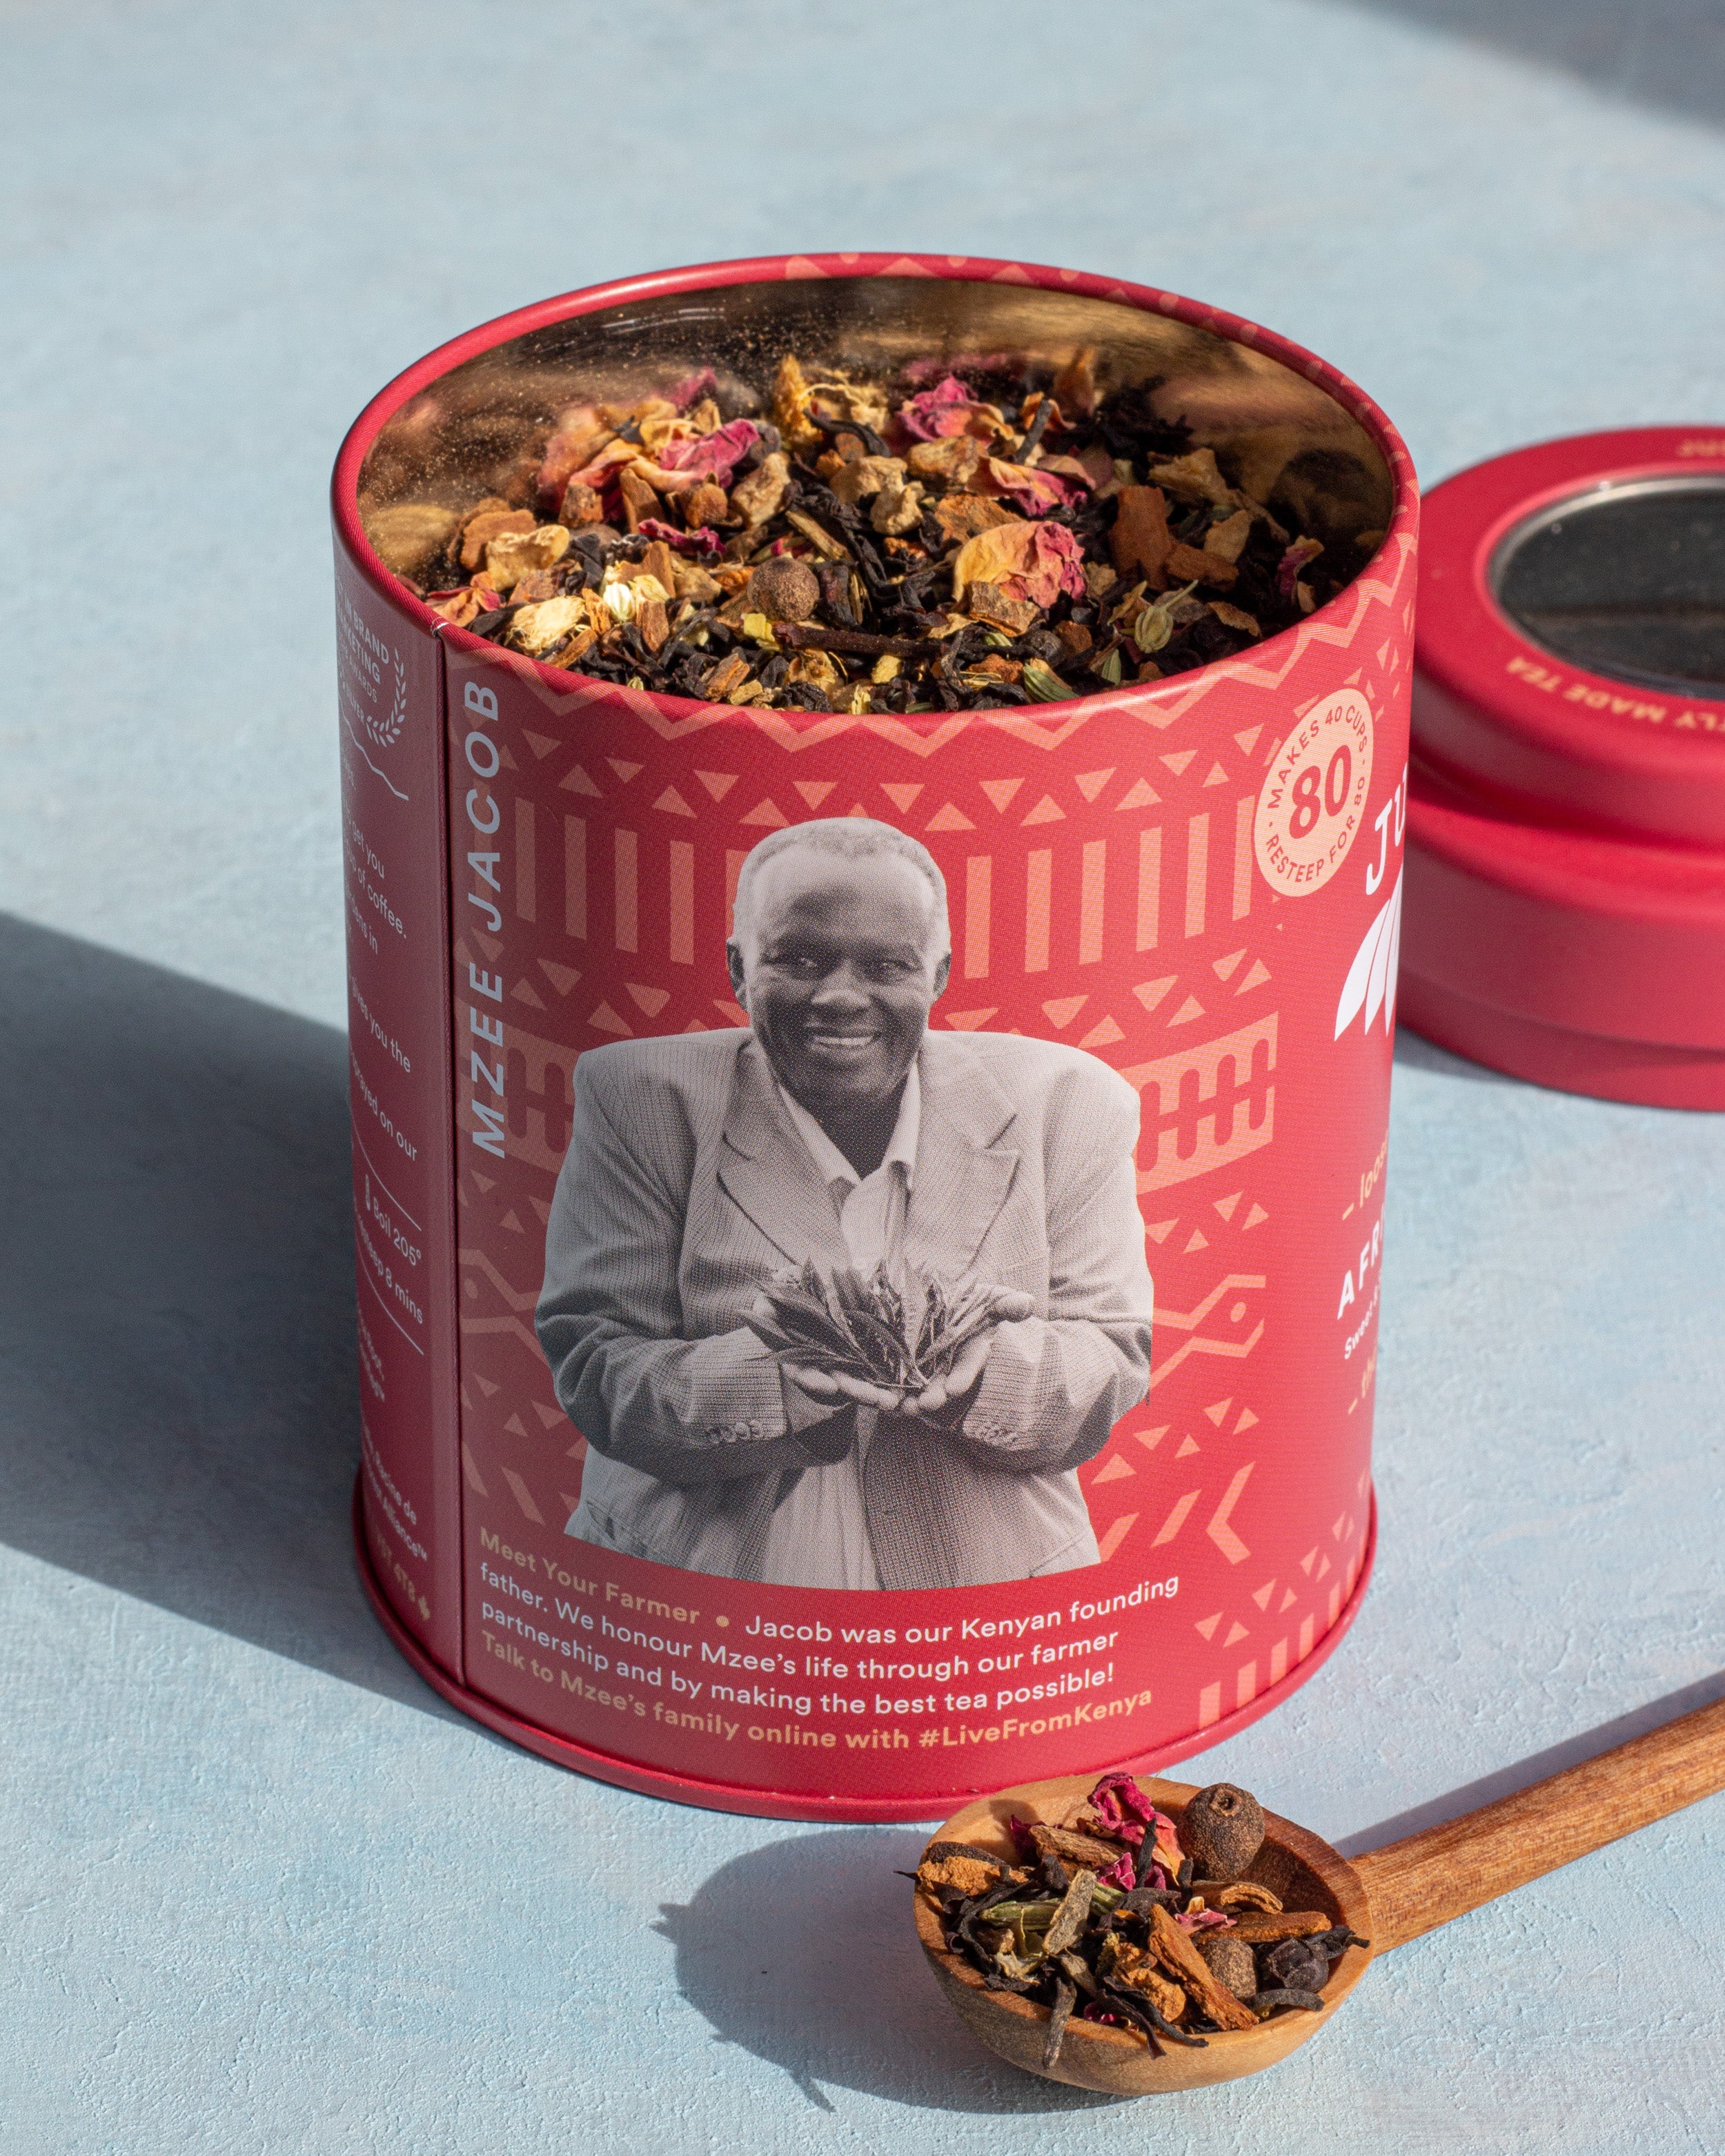 Black Tea Canister & Spoon- African Chai 100g